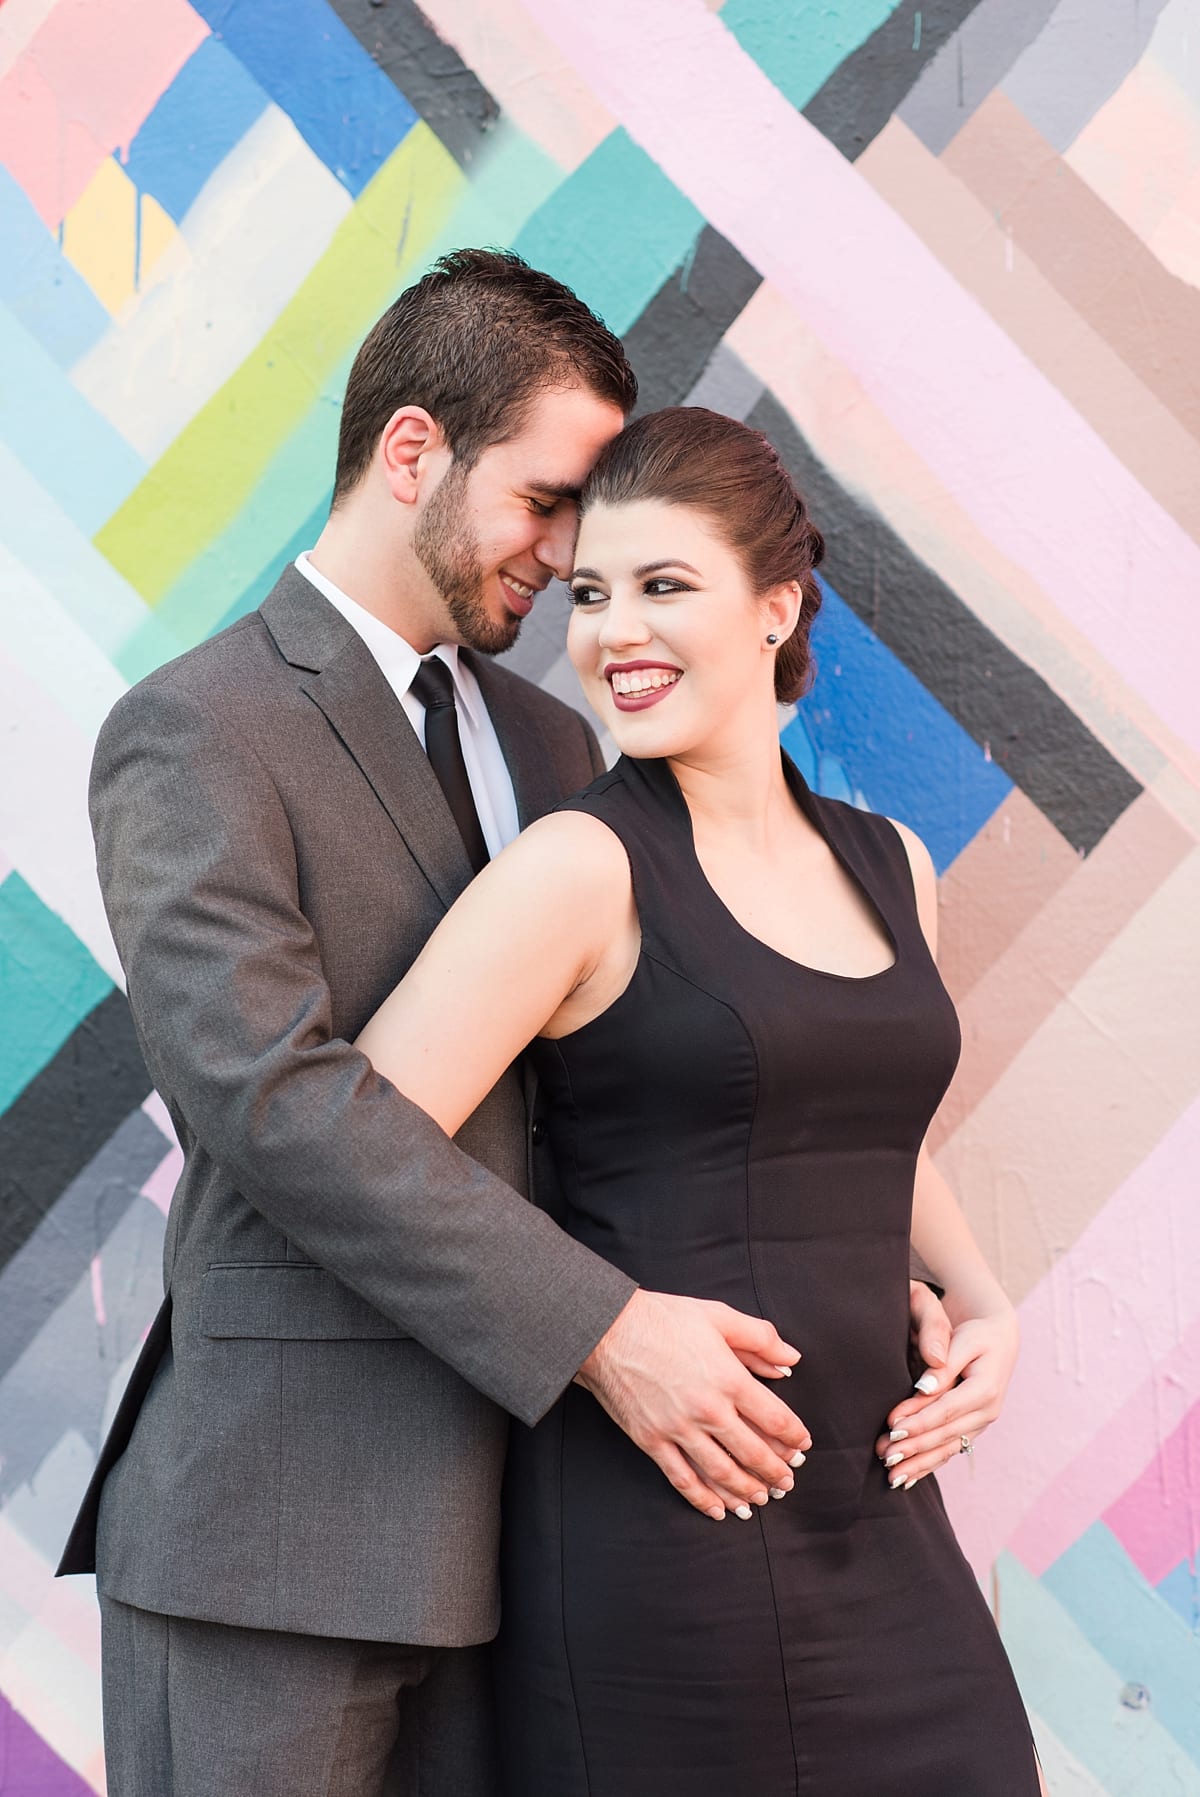 Wynwood-Walls-Engagement-Pictures_0414